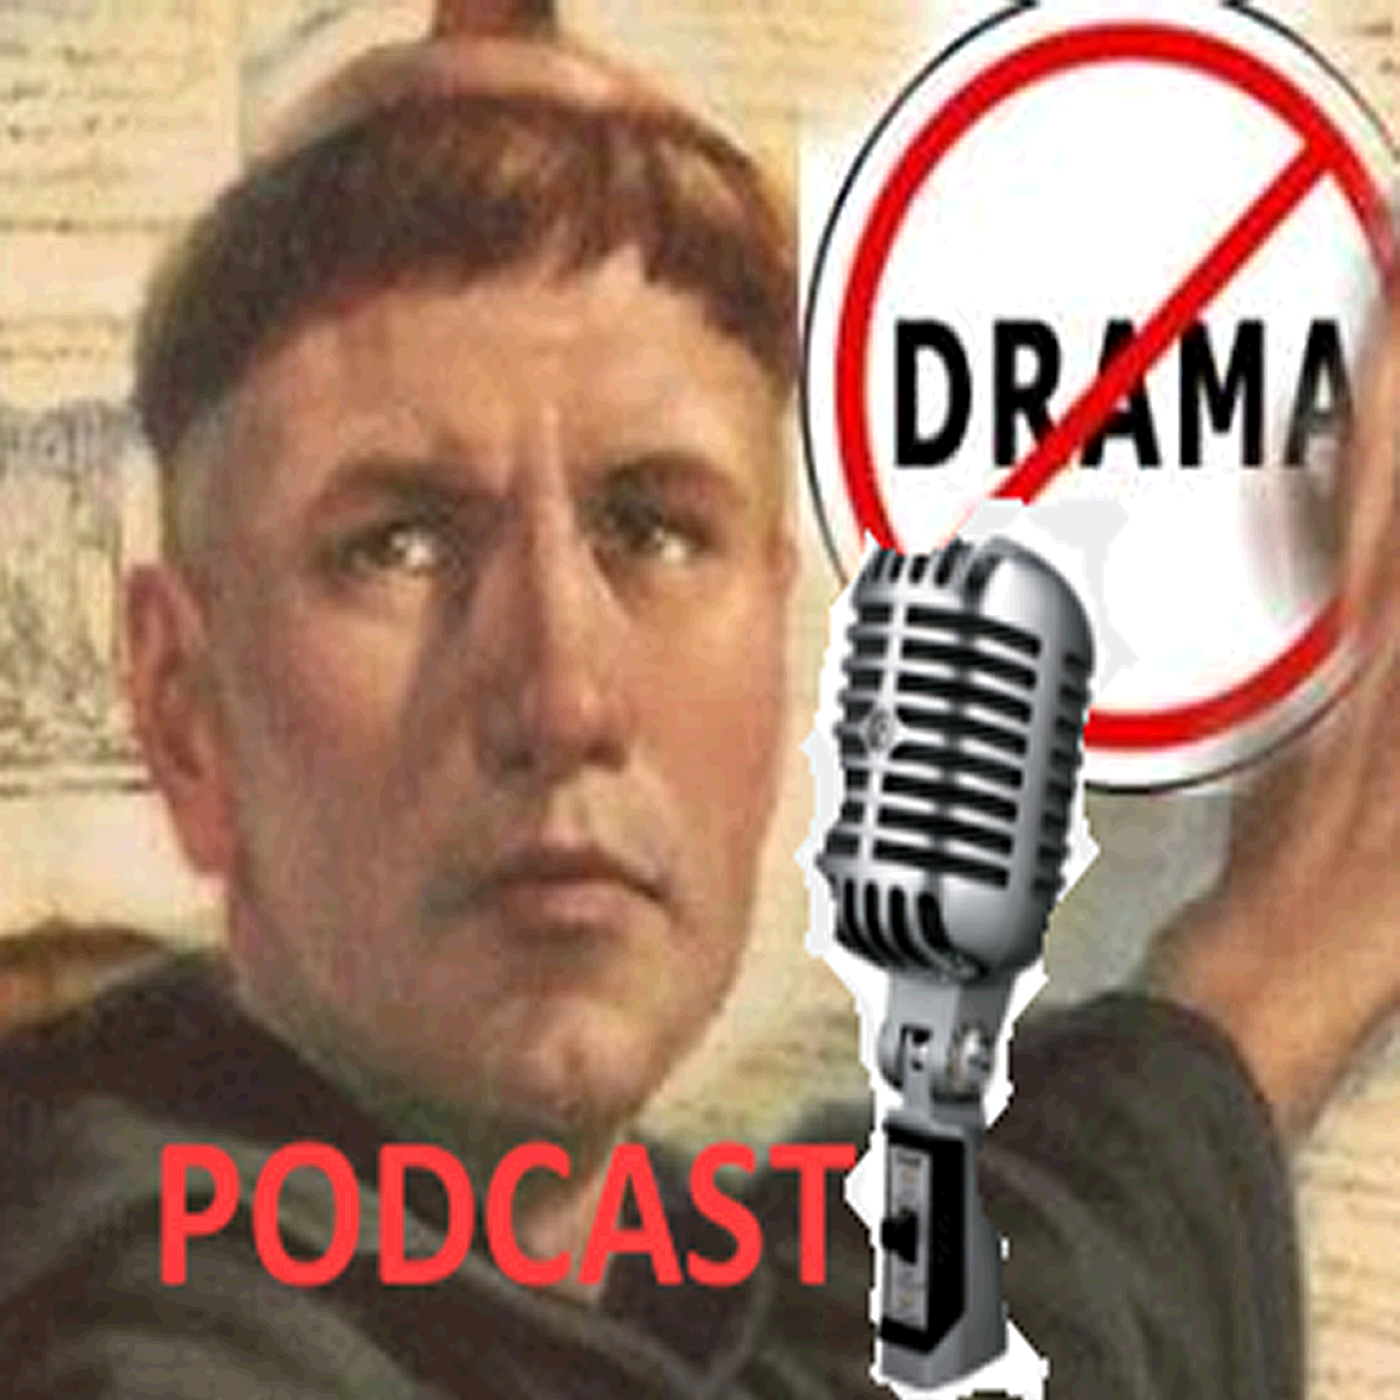 NO DRAMA Podcast - Episode 12 - Romans 10 -St. Paul and righteousness - The Apostles’ Creed - Our Witness